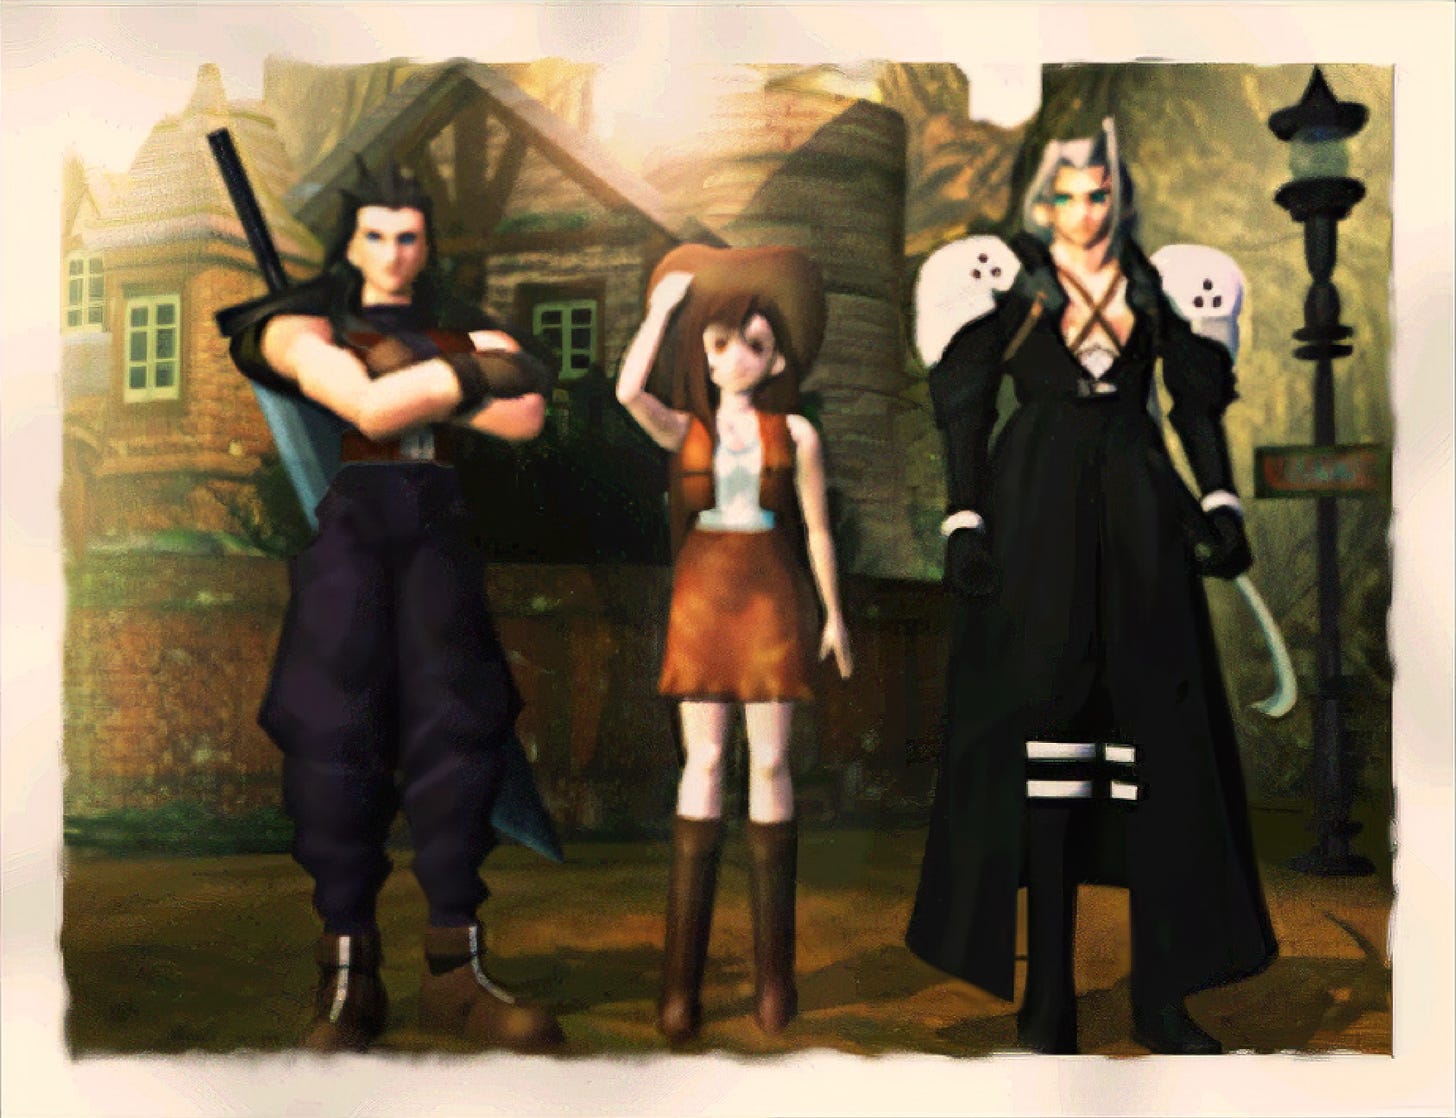 Photo from Final Fantasy VII original with Zack, cowgirl Tifa and Sephiroth.